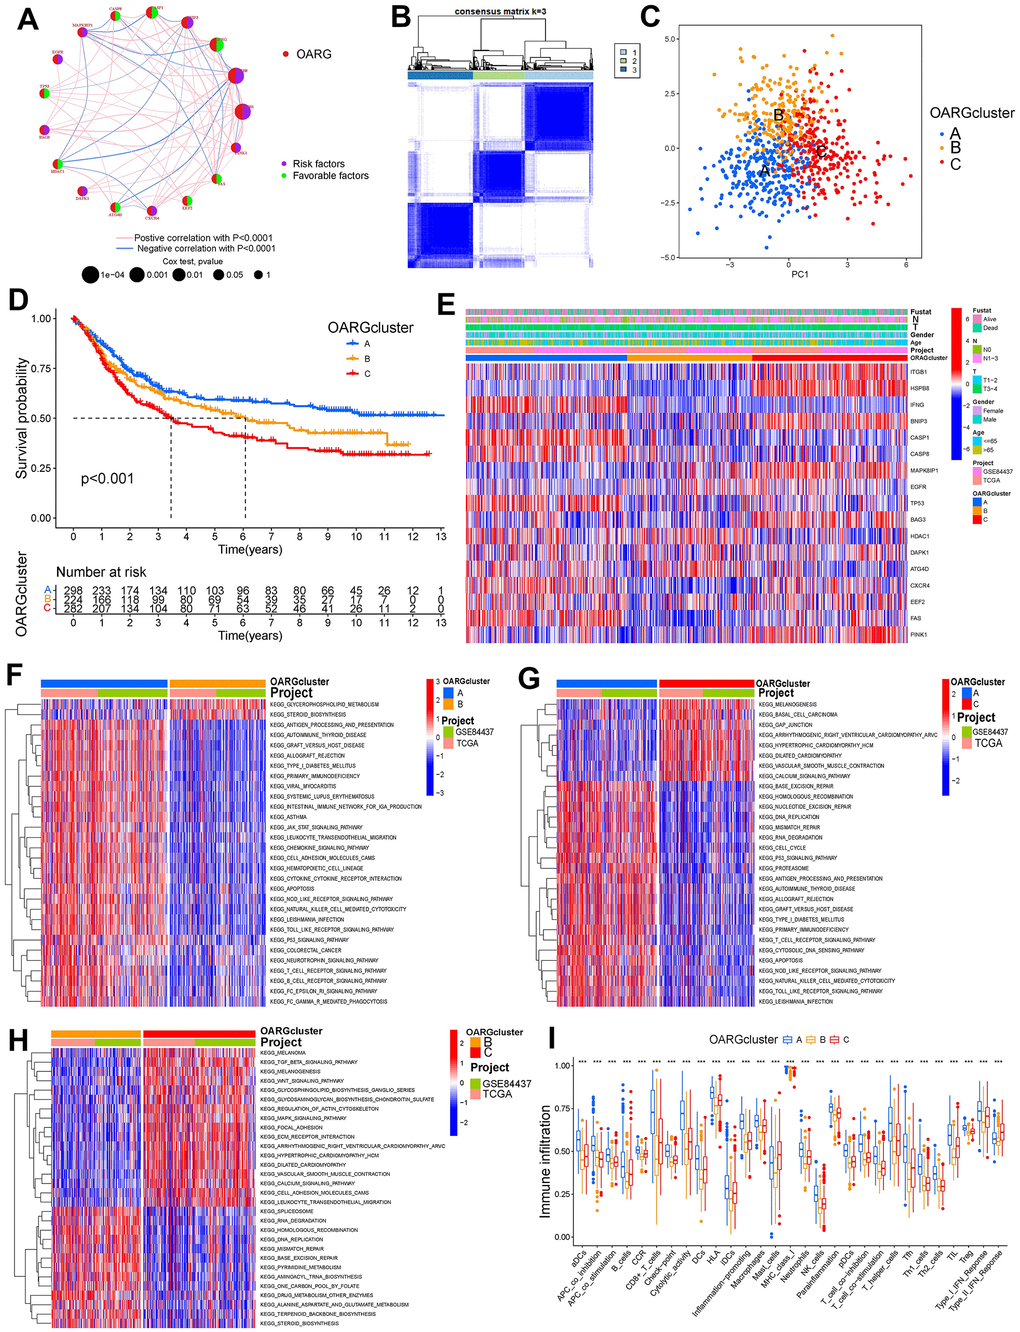 OARG modification patterns and the biological characteristics of each pattern. (A) The interaction of OARGs. (B) Consensus matrix. (C) Principal component analysis for three OARG patterns’ transcriptome profiles. (D) Survival analyses for the three OARG patterns. (E) Clinical characteristics of three OARG modification patterns. (F–H) The activation statuses of biological pathways are displayed in different OARG modification patterns. (I) The infiltration levels of immune cell subsets in three OARG modification patterns.